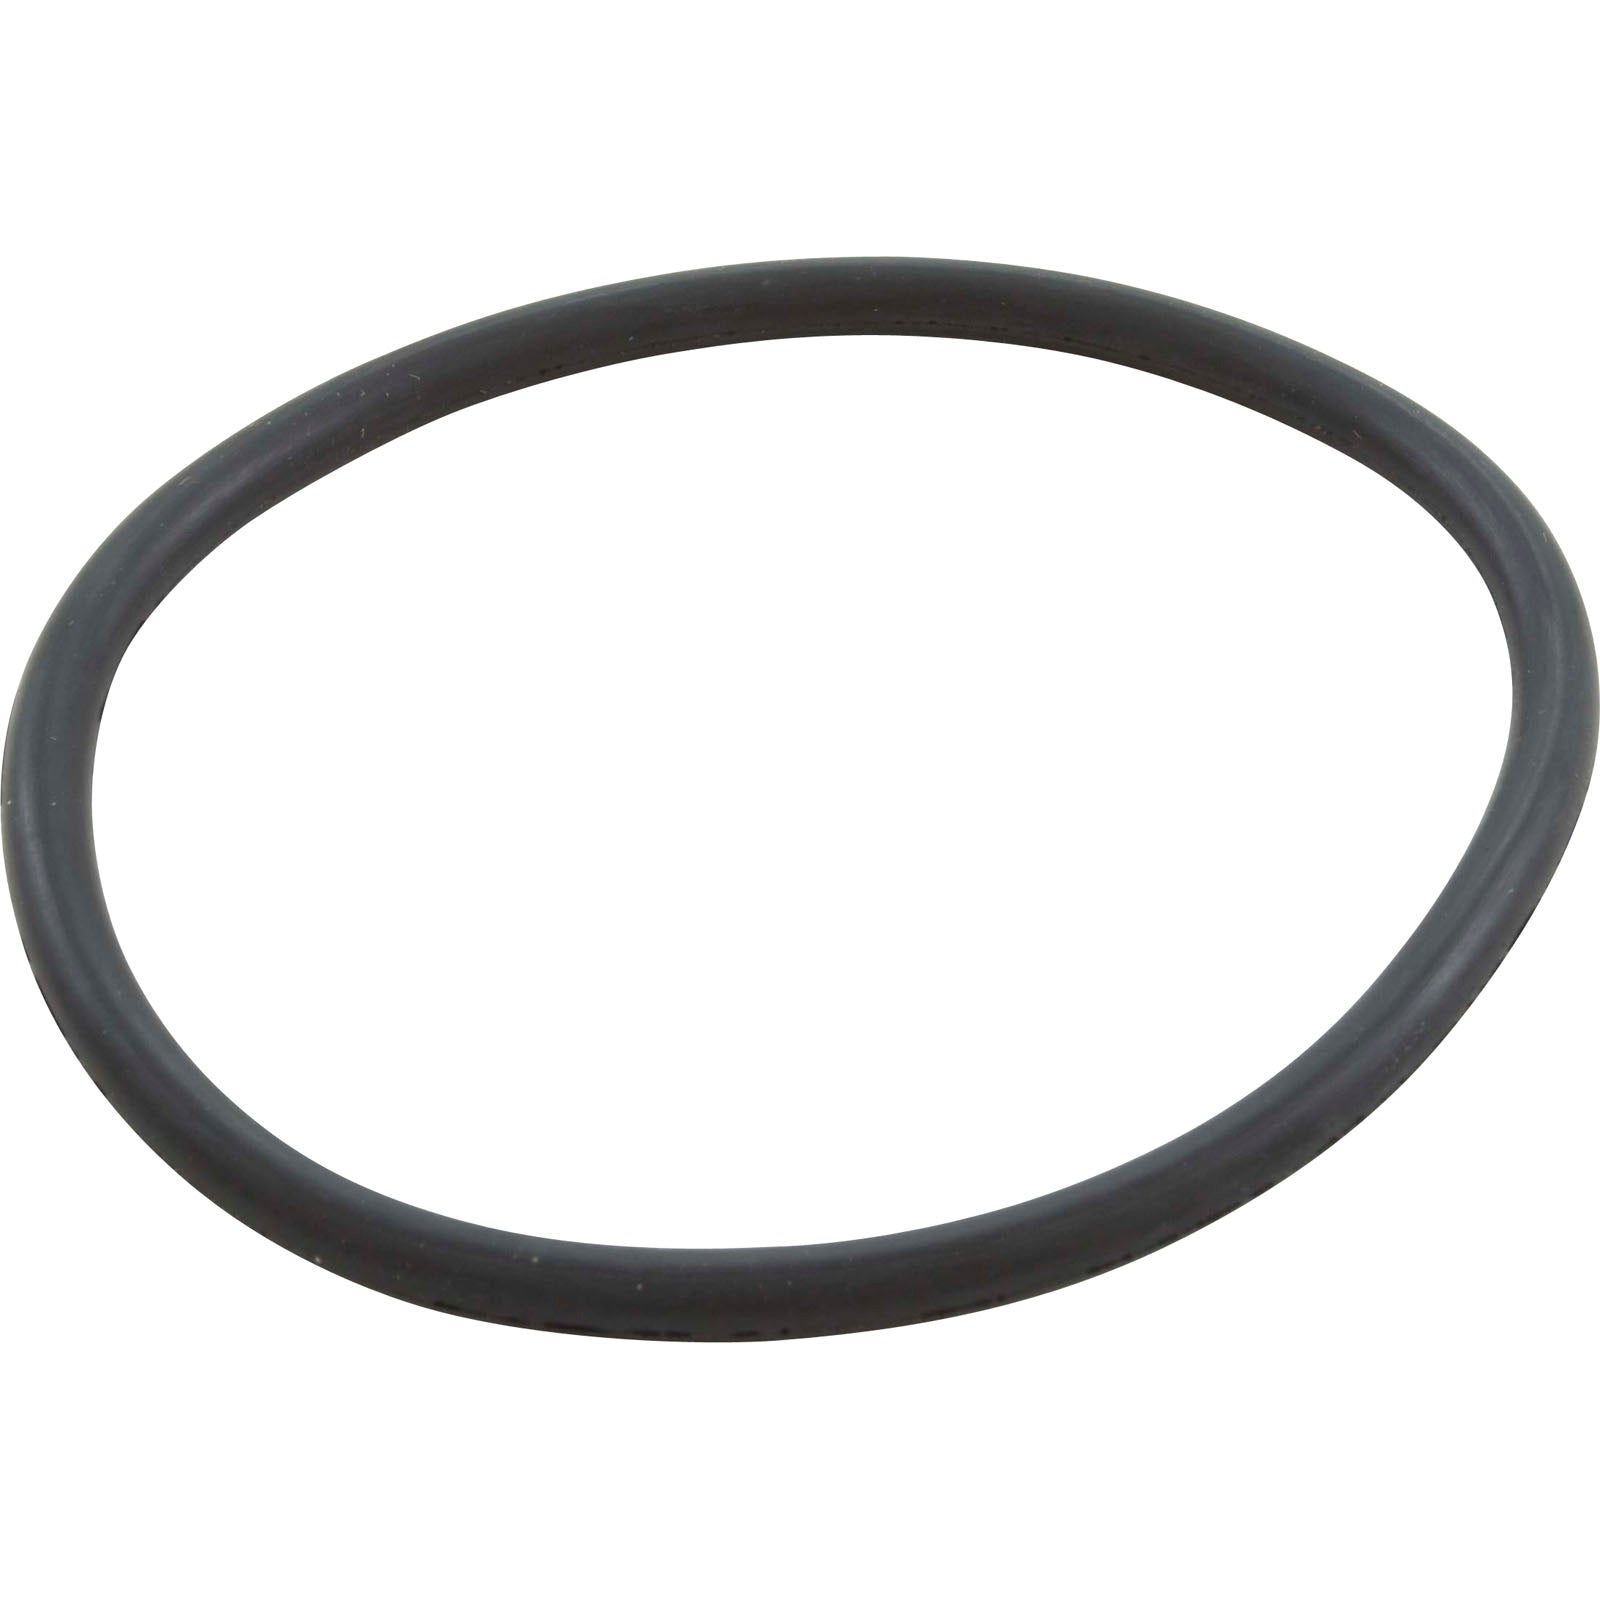 O-Ring, Speck 21-80 All Models, 4" Adapter/ 2923141210